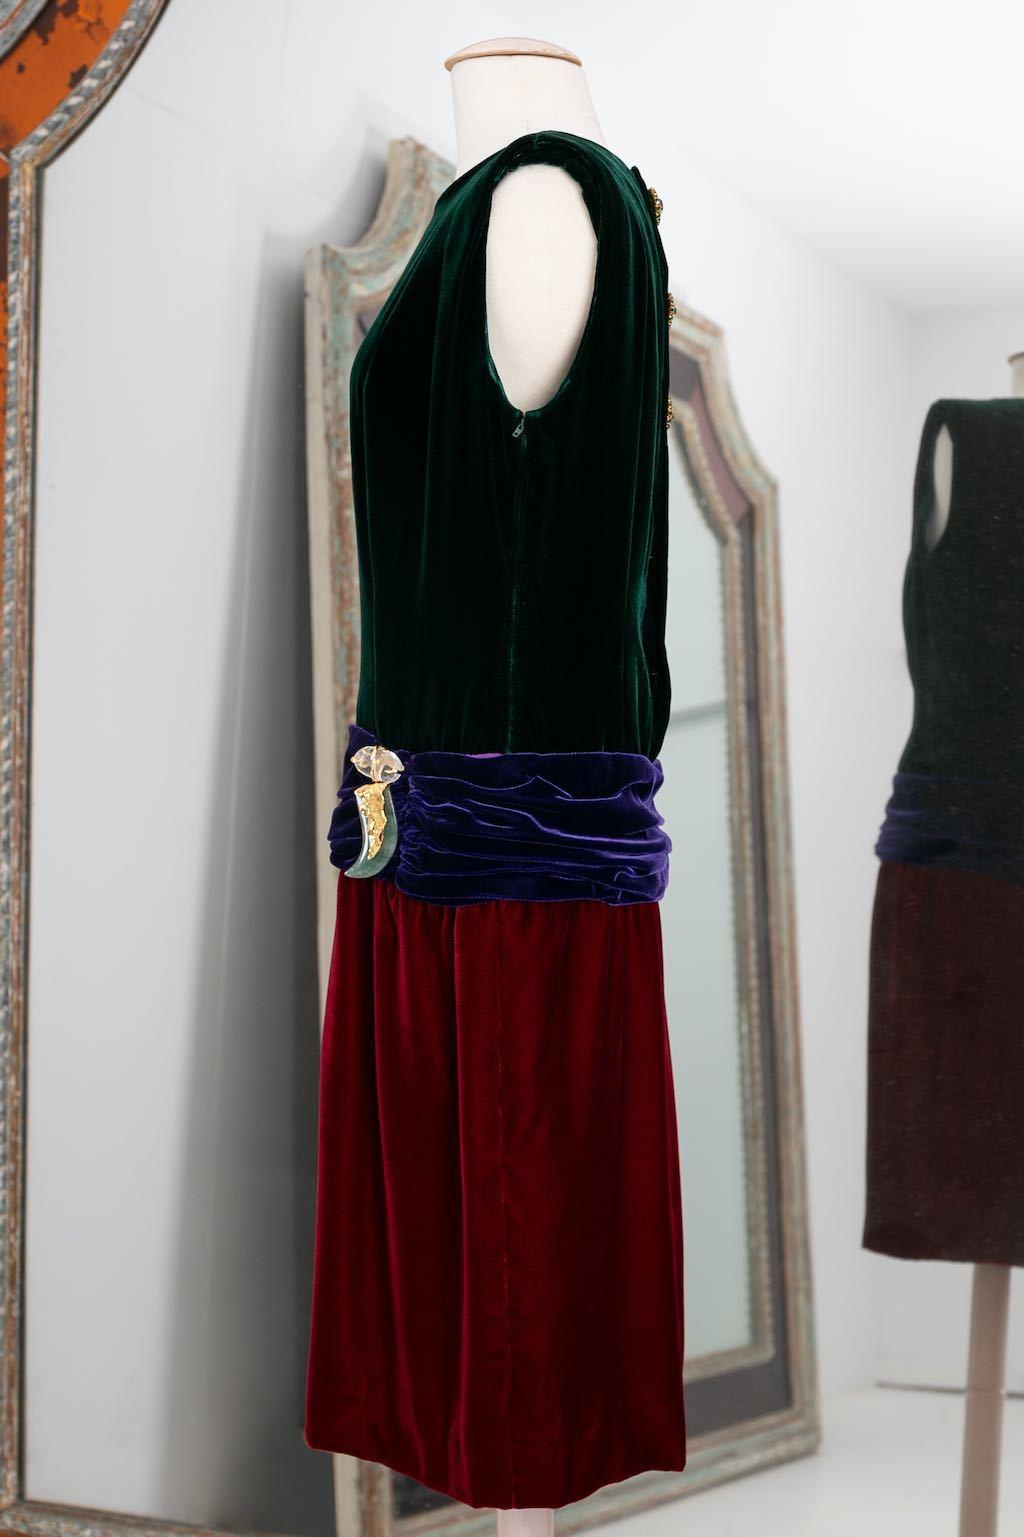 Yves Saint Laurent Haute Couture Silk velvet dress with drop waist, embellished with a jewel made of rock crystal, jadeite ad ormoulu. Ribbon N°67412. Collection Haute couture 1990/91. 
No composition or size tag, it fits a size 38FR.

Additional